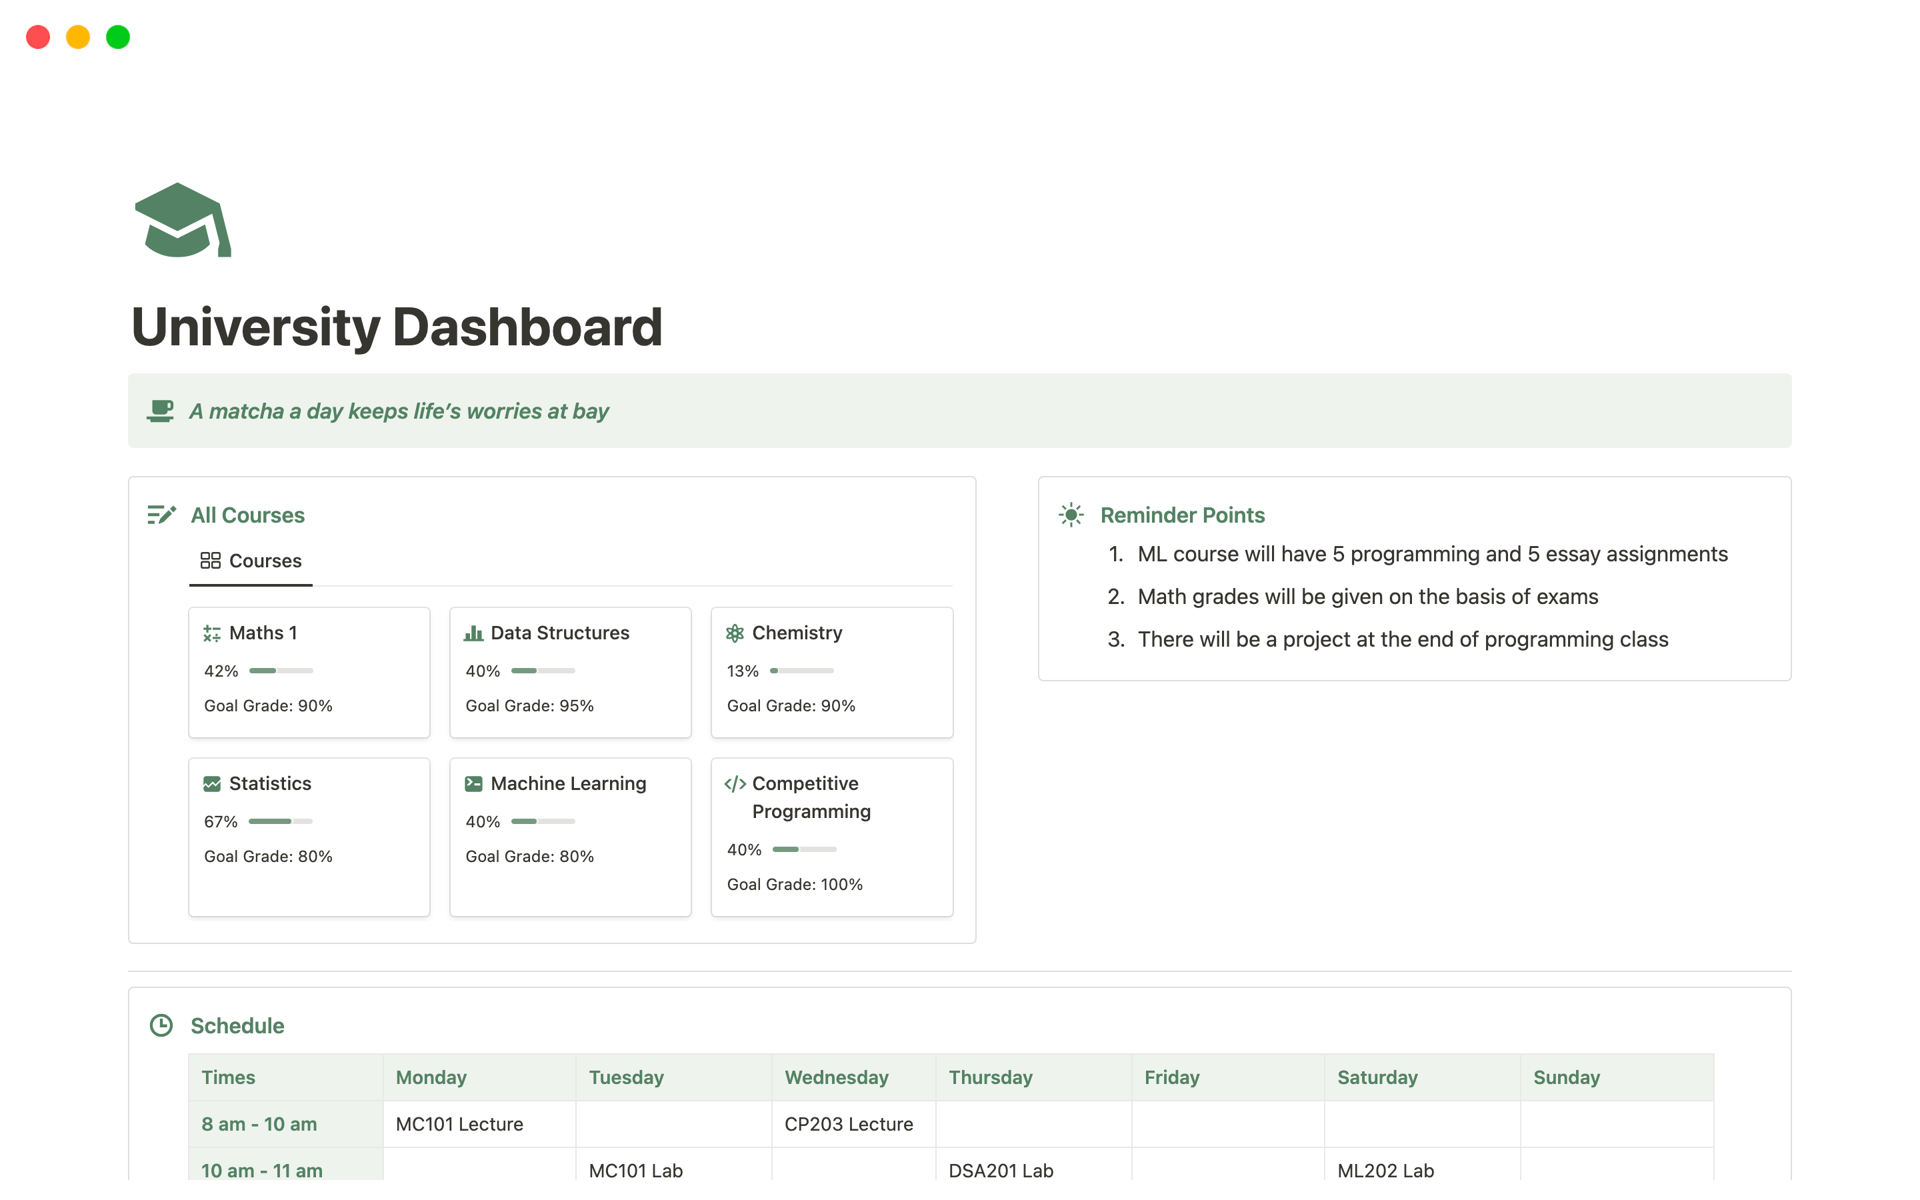 University life just got better.

Presenting the University Dashboard template with 6 different versions that will help you track everything you do at uni to have a matcha-better day! 🍵